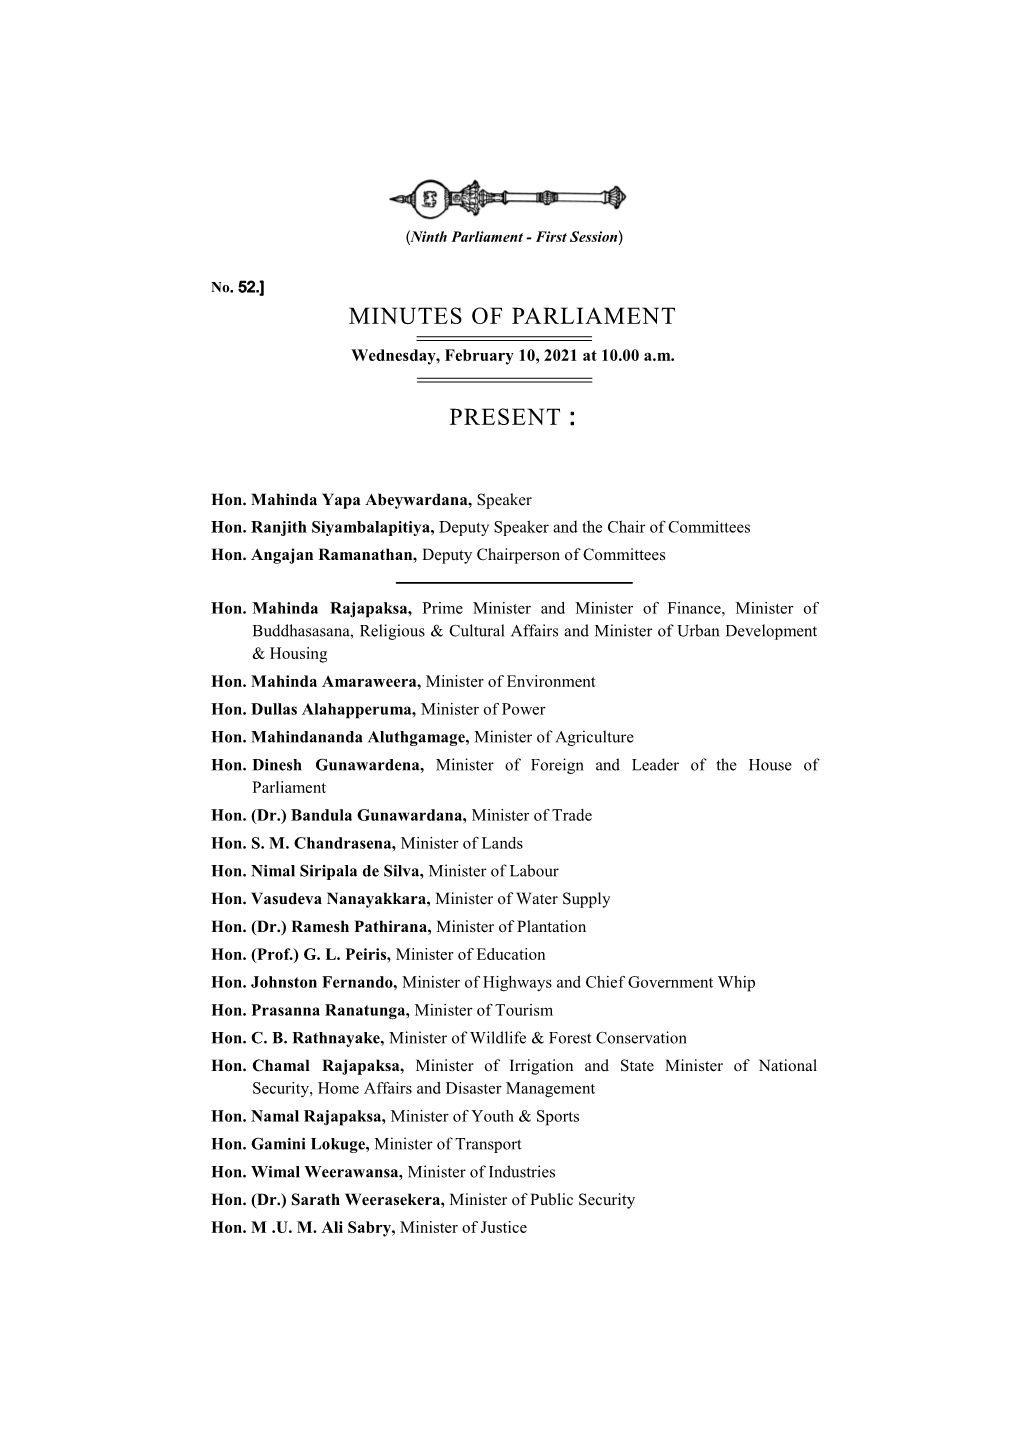 Minutes of Parliament for 10.02.2021